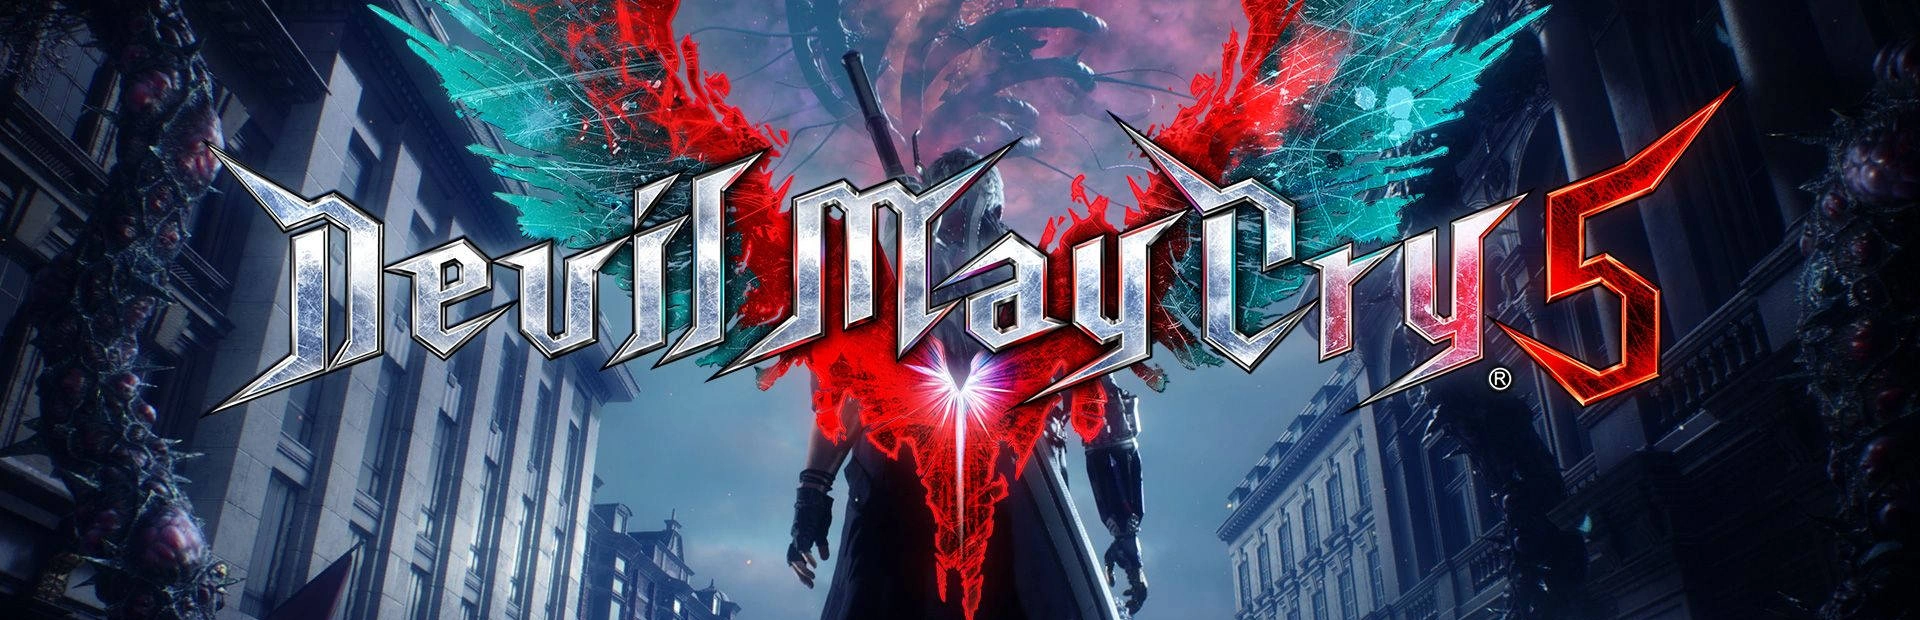 DEVIL MAY CRY 5.banner2